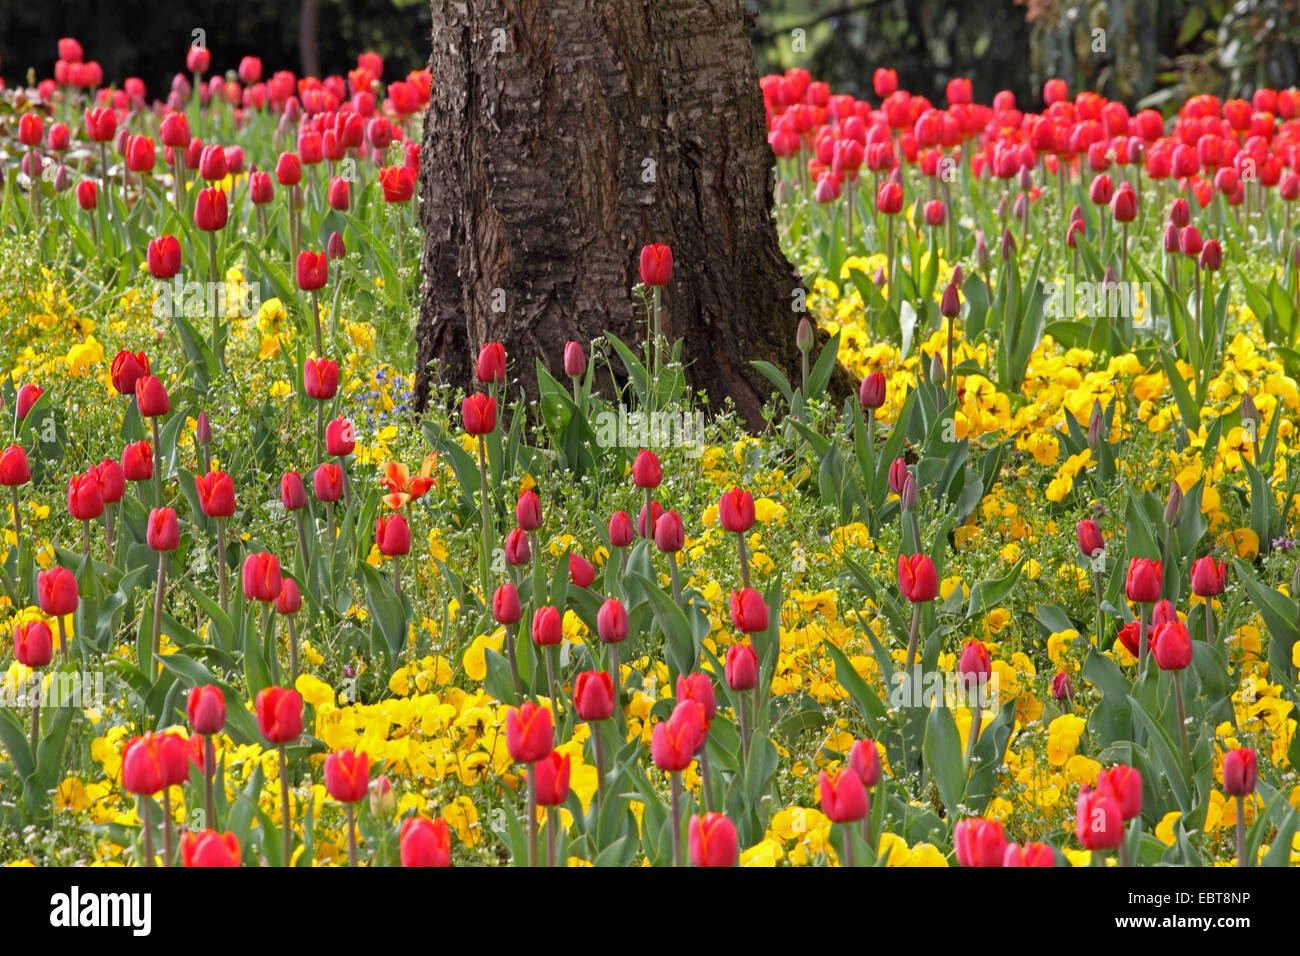 common garden tulip (Tulipa gesneriana), great number of red tulips and yellow pansies in a flower bed around a tree in a park, Germany Stock Photo